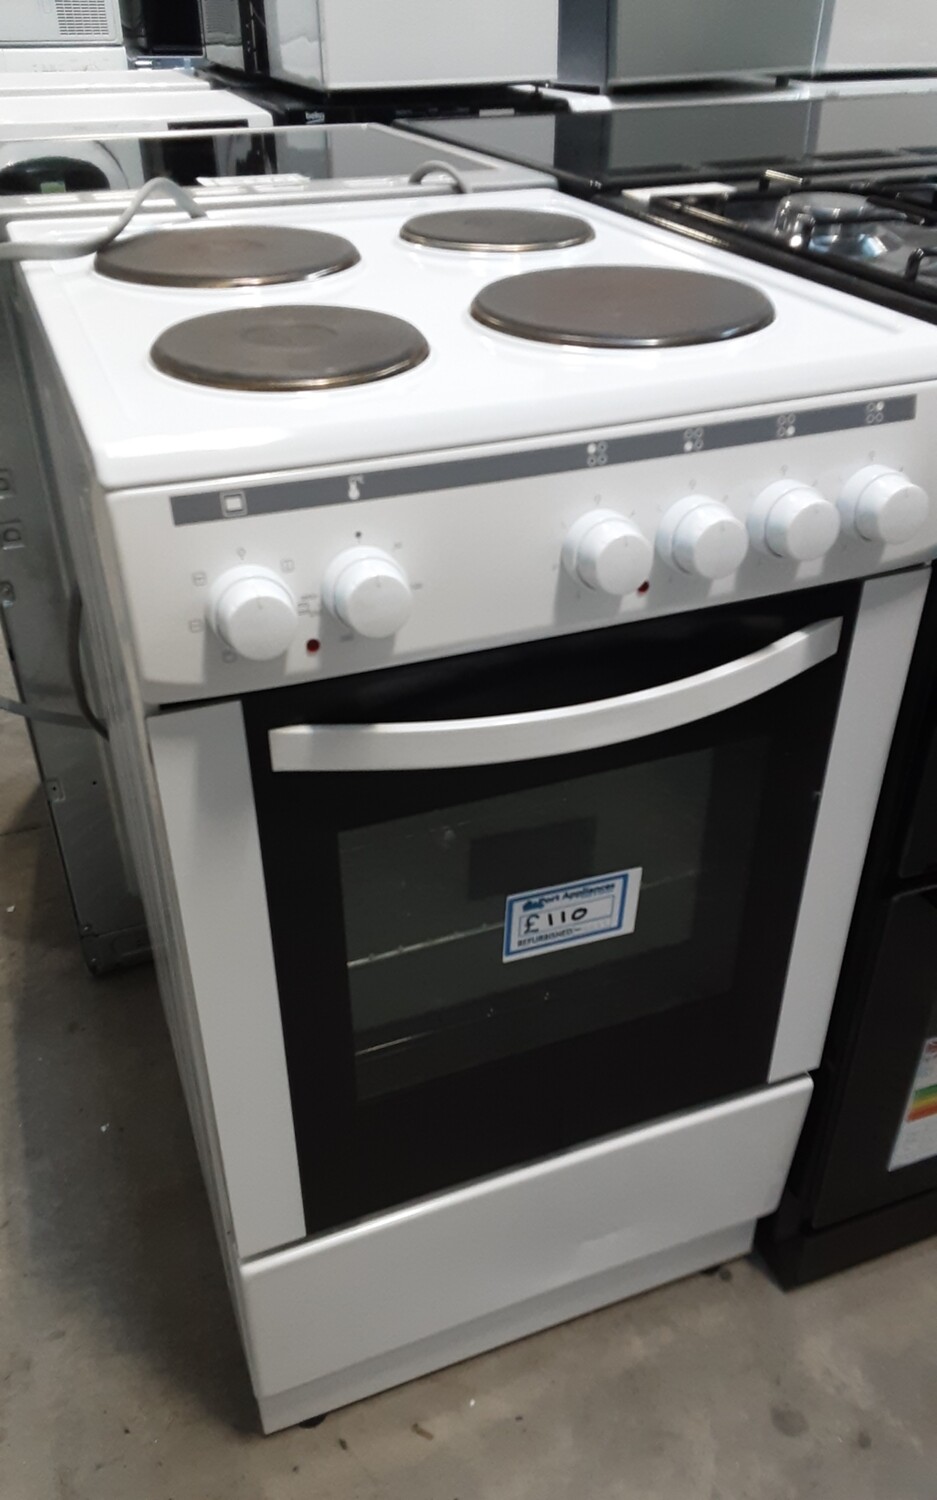 Essentials 50cm Electric cooker - White  - Refurbished + 6 month guarantee 